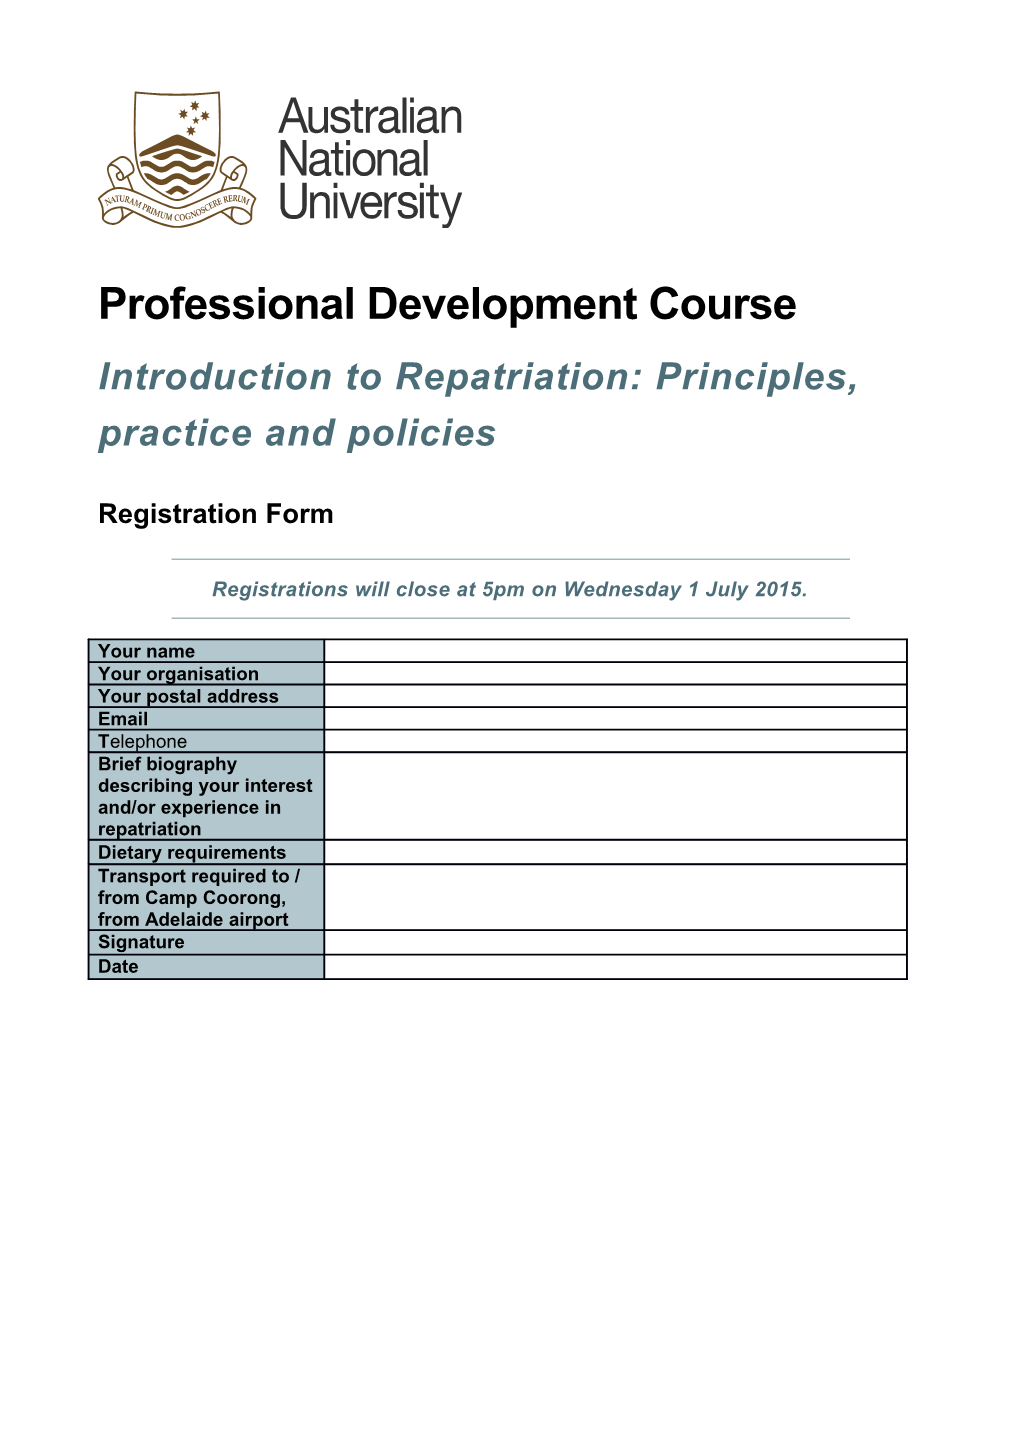 Introduction to Repatriation: Principles, Practice and Policies